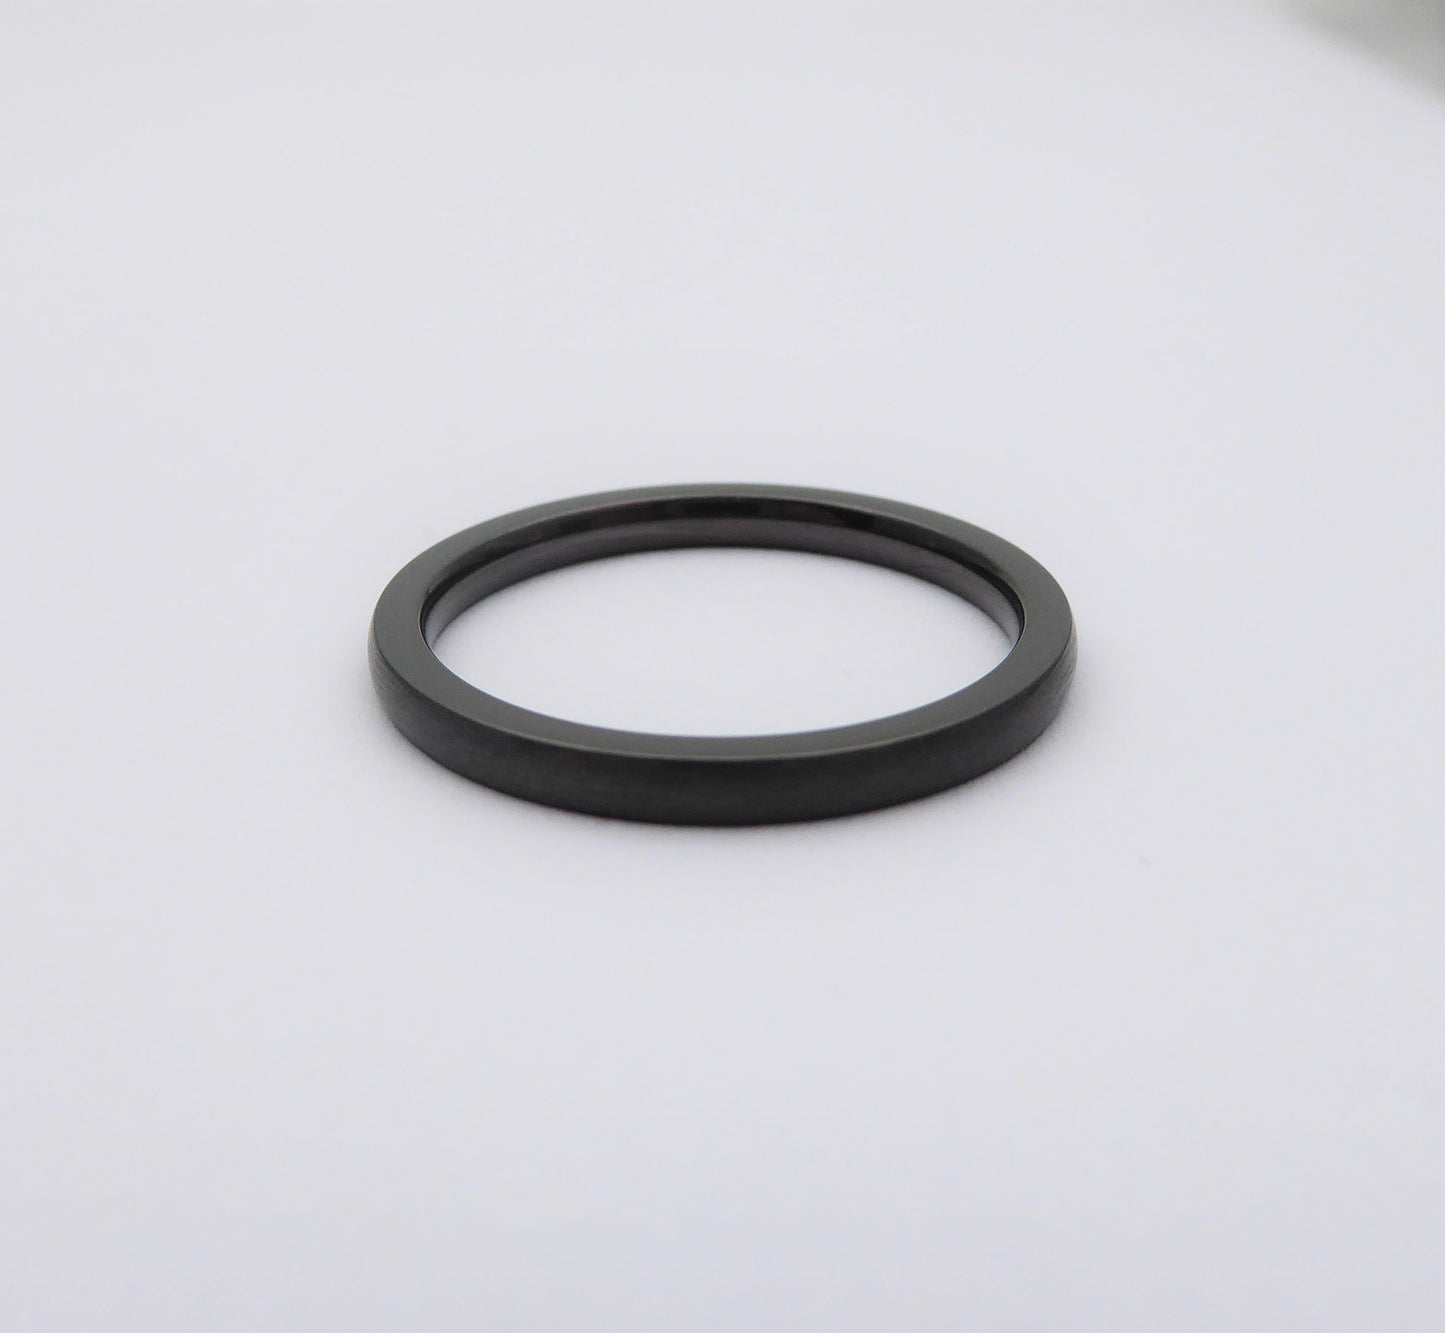 2mm Black Zirconium with matte brushed finish - wedding ring band for men and women